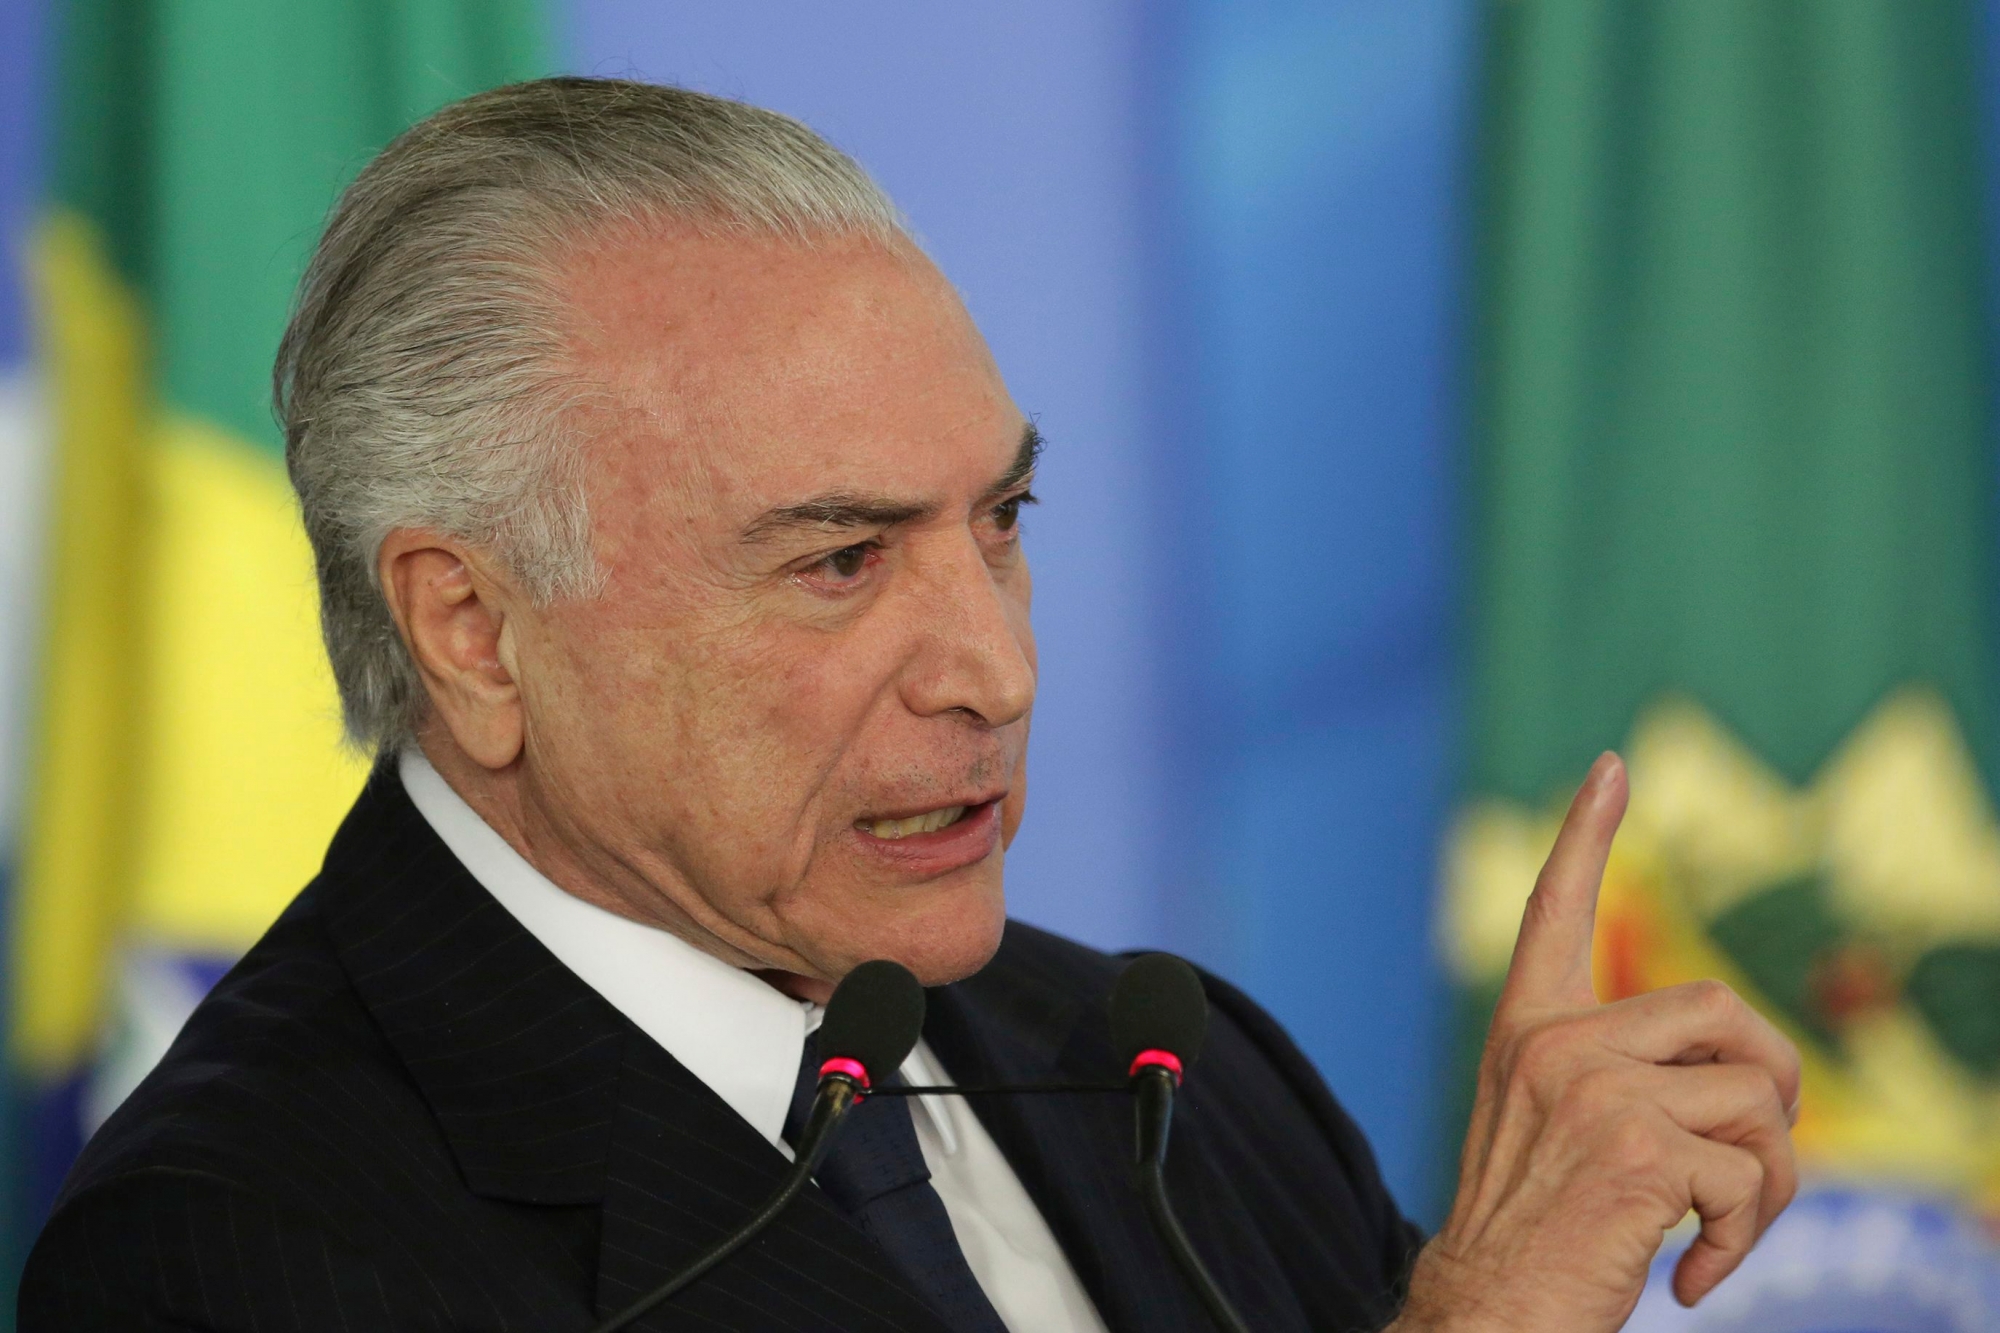 Brazil's President Michel Temer speaks during a ceremony at the Planalto Presidential Palace, in Brasilia, Monday, June 26, 2017. Temer is expressing defiance in the face of possible corruption charges, the lowest approval rating for a Brazilian leader in a generation and calls for his resignation. He says nothing will "destroy" his government. (AP Photo/Eraldo Peres) Brazil Political Crisis